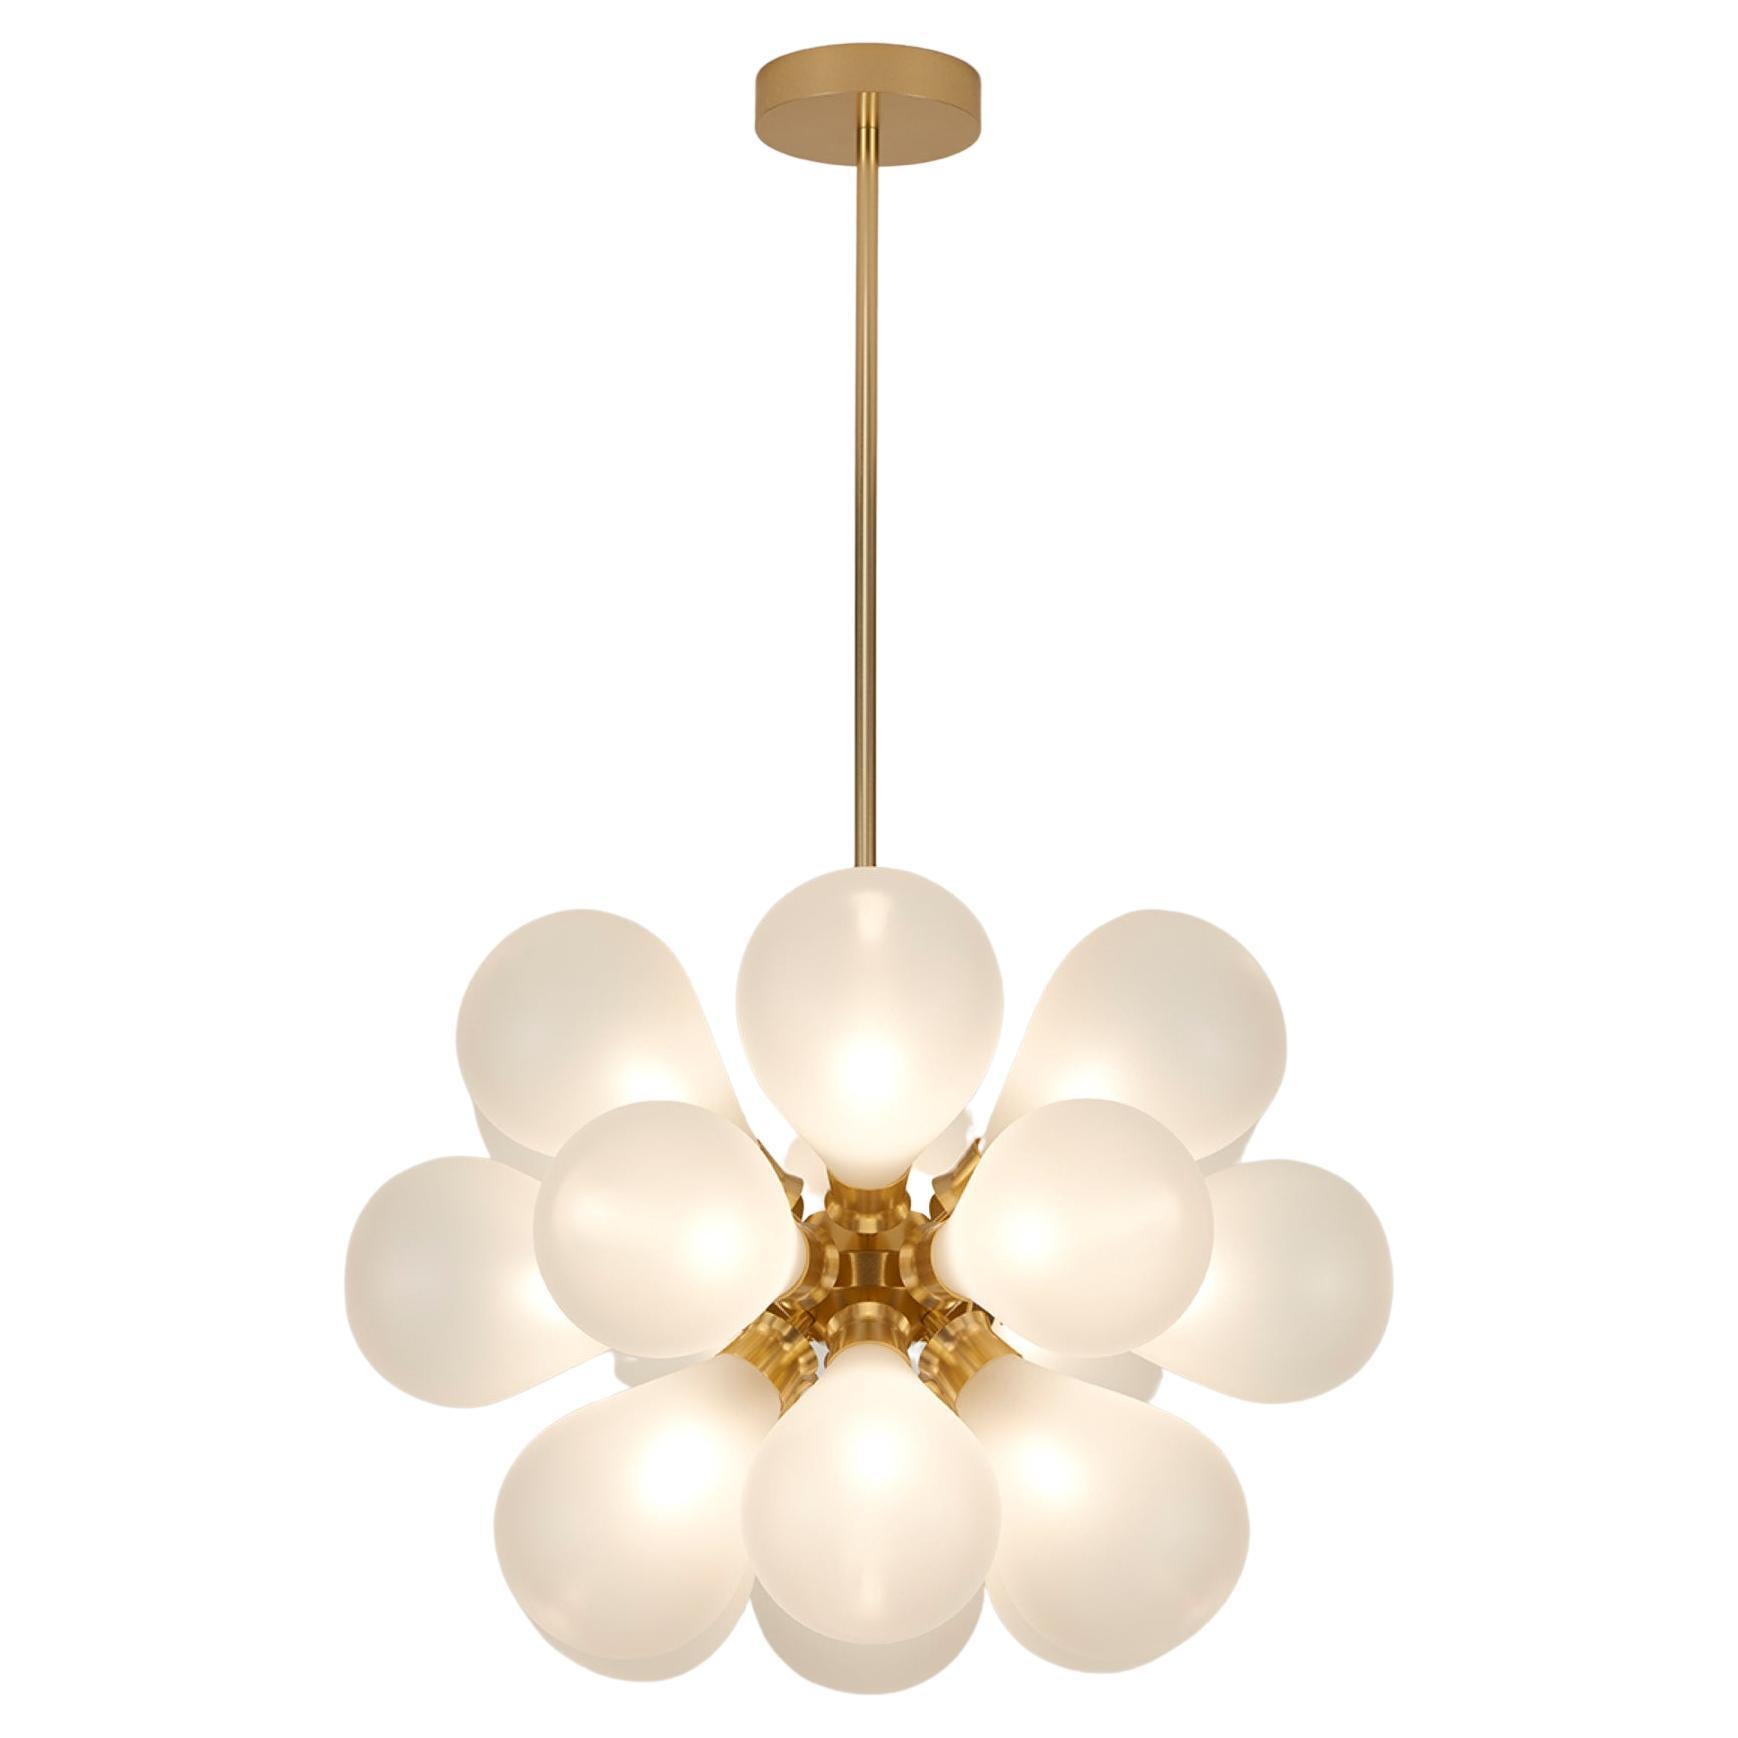 Cintola Maxi Pendant in Satin Gold with 18 Handblown Frosted Glass Globes